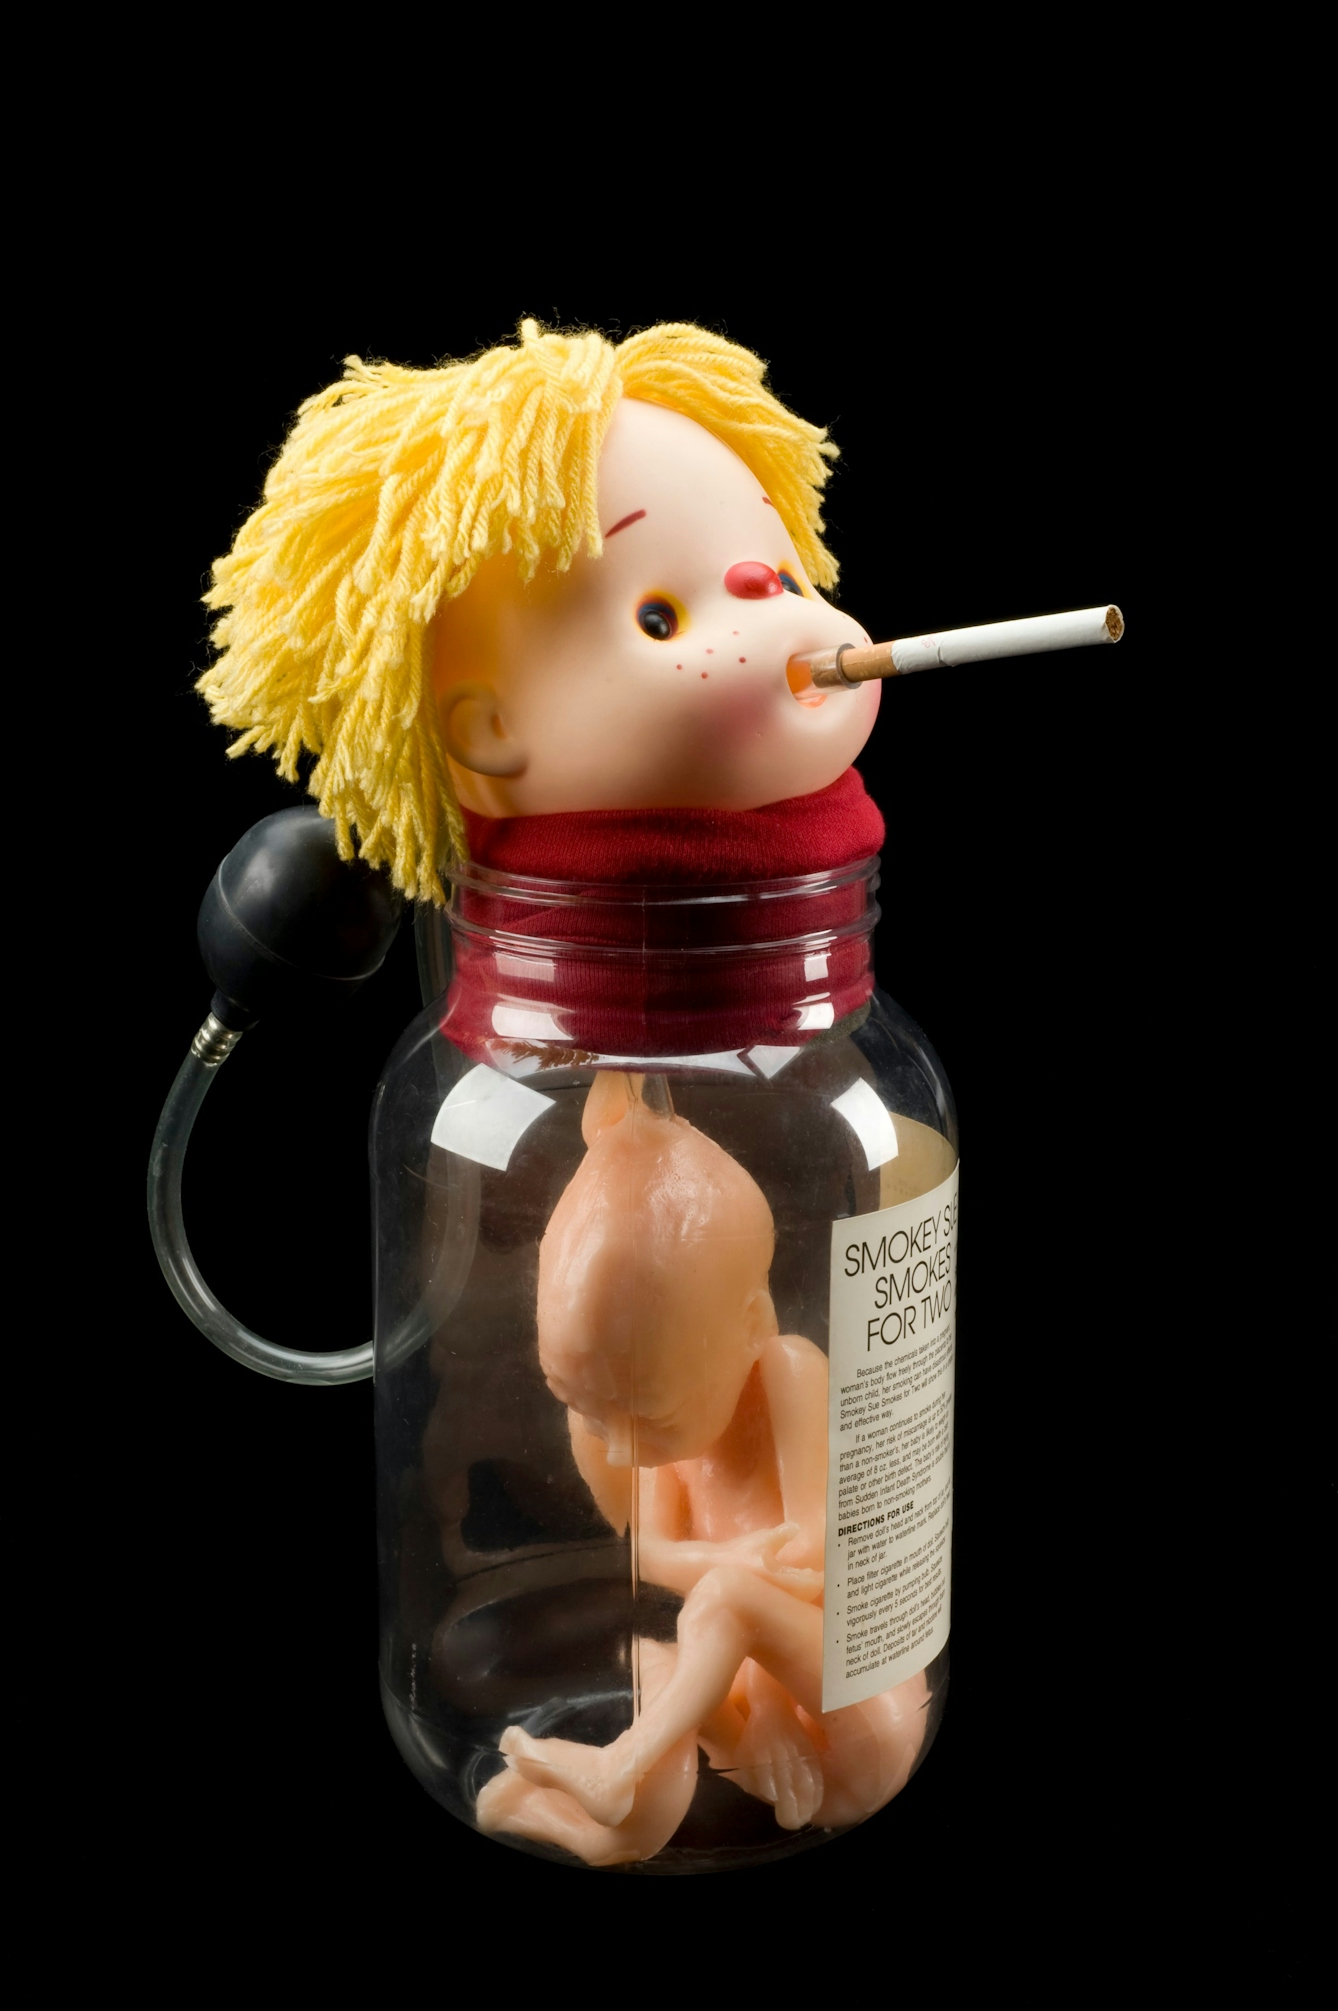 Photograph of a "Smokey Sue" doll, which features a doll's head mounted on a jar with a foetus-model inside the jar. 